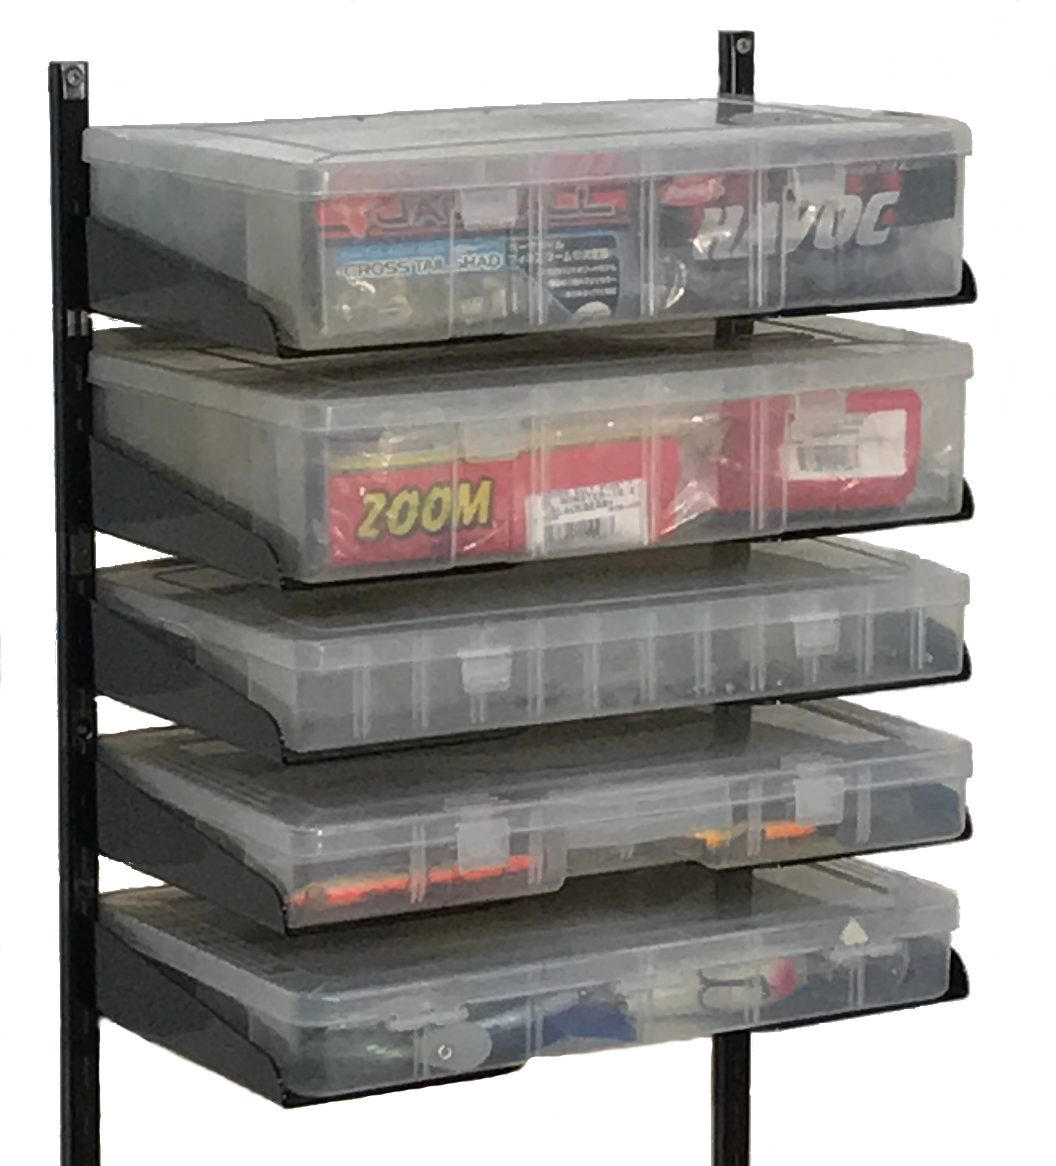 https://fishingmancave.com/wp-content/uploads/2018/03/trays-with-tackle-boxes.png